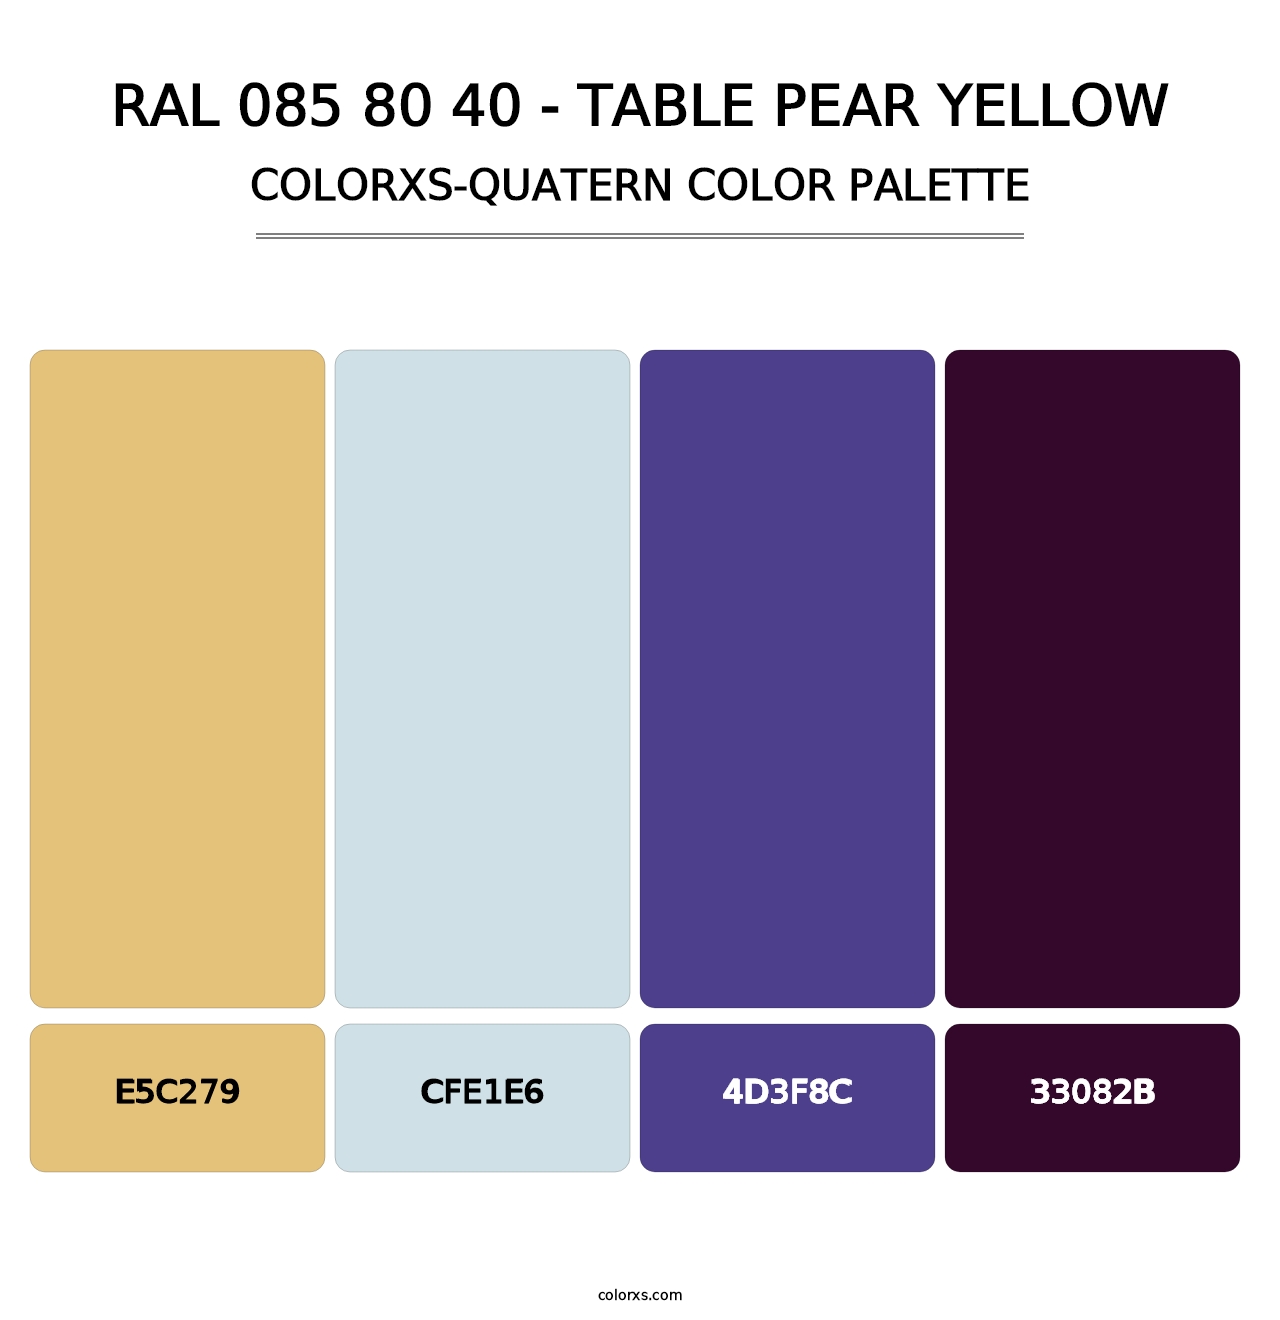 RAL 085 80 40 - Table Pear Yellow - Colorxs Quatern Palette